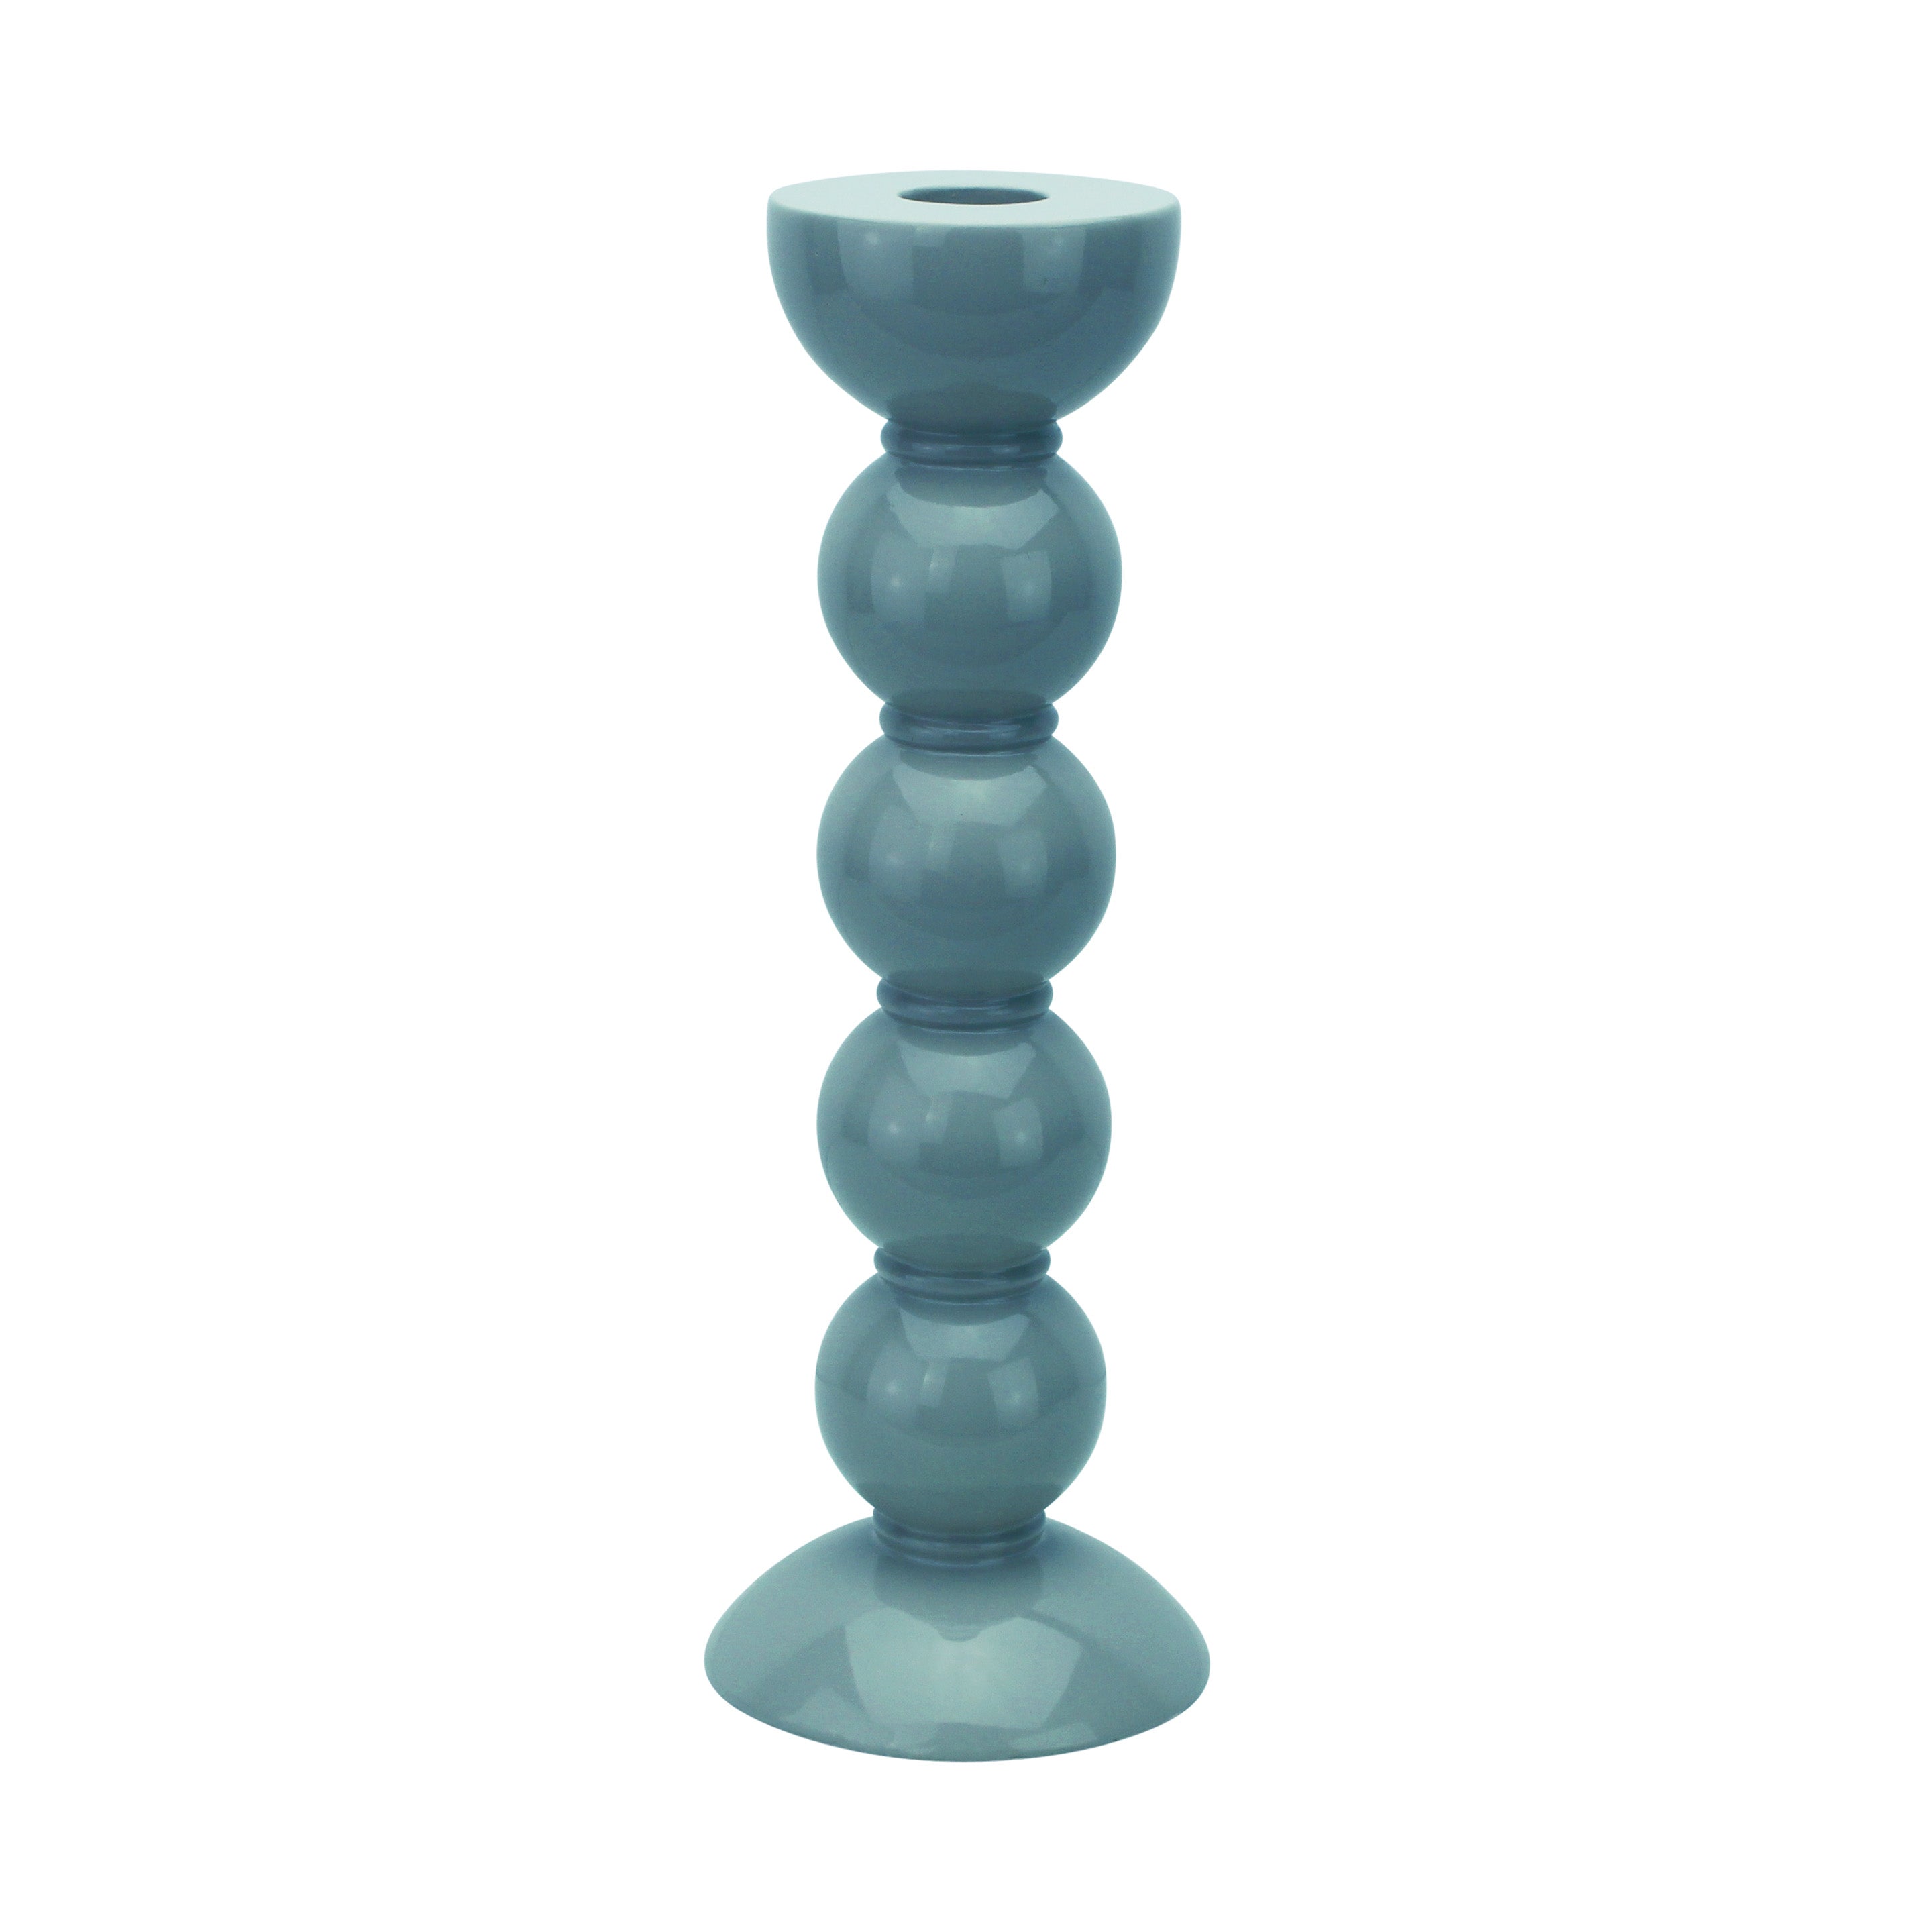 Tall bobbin candle holder in chambray